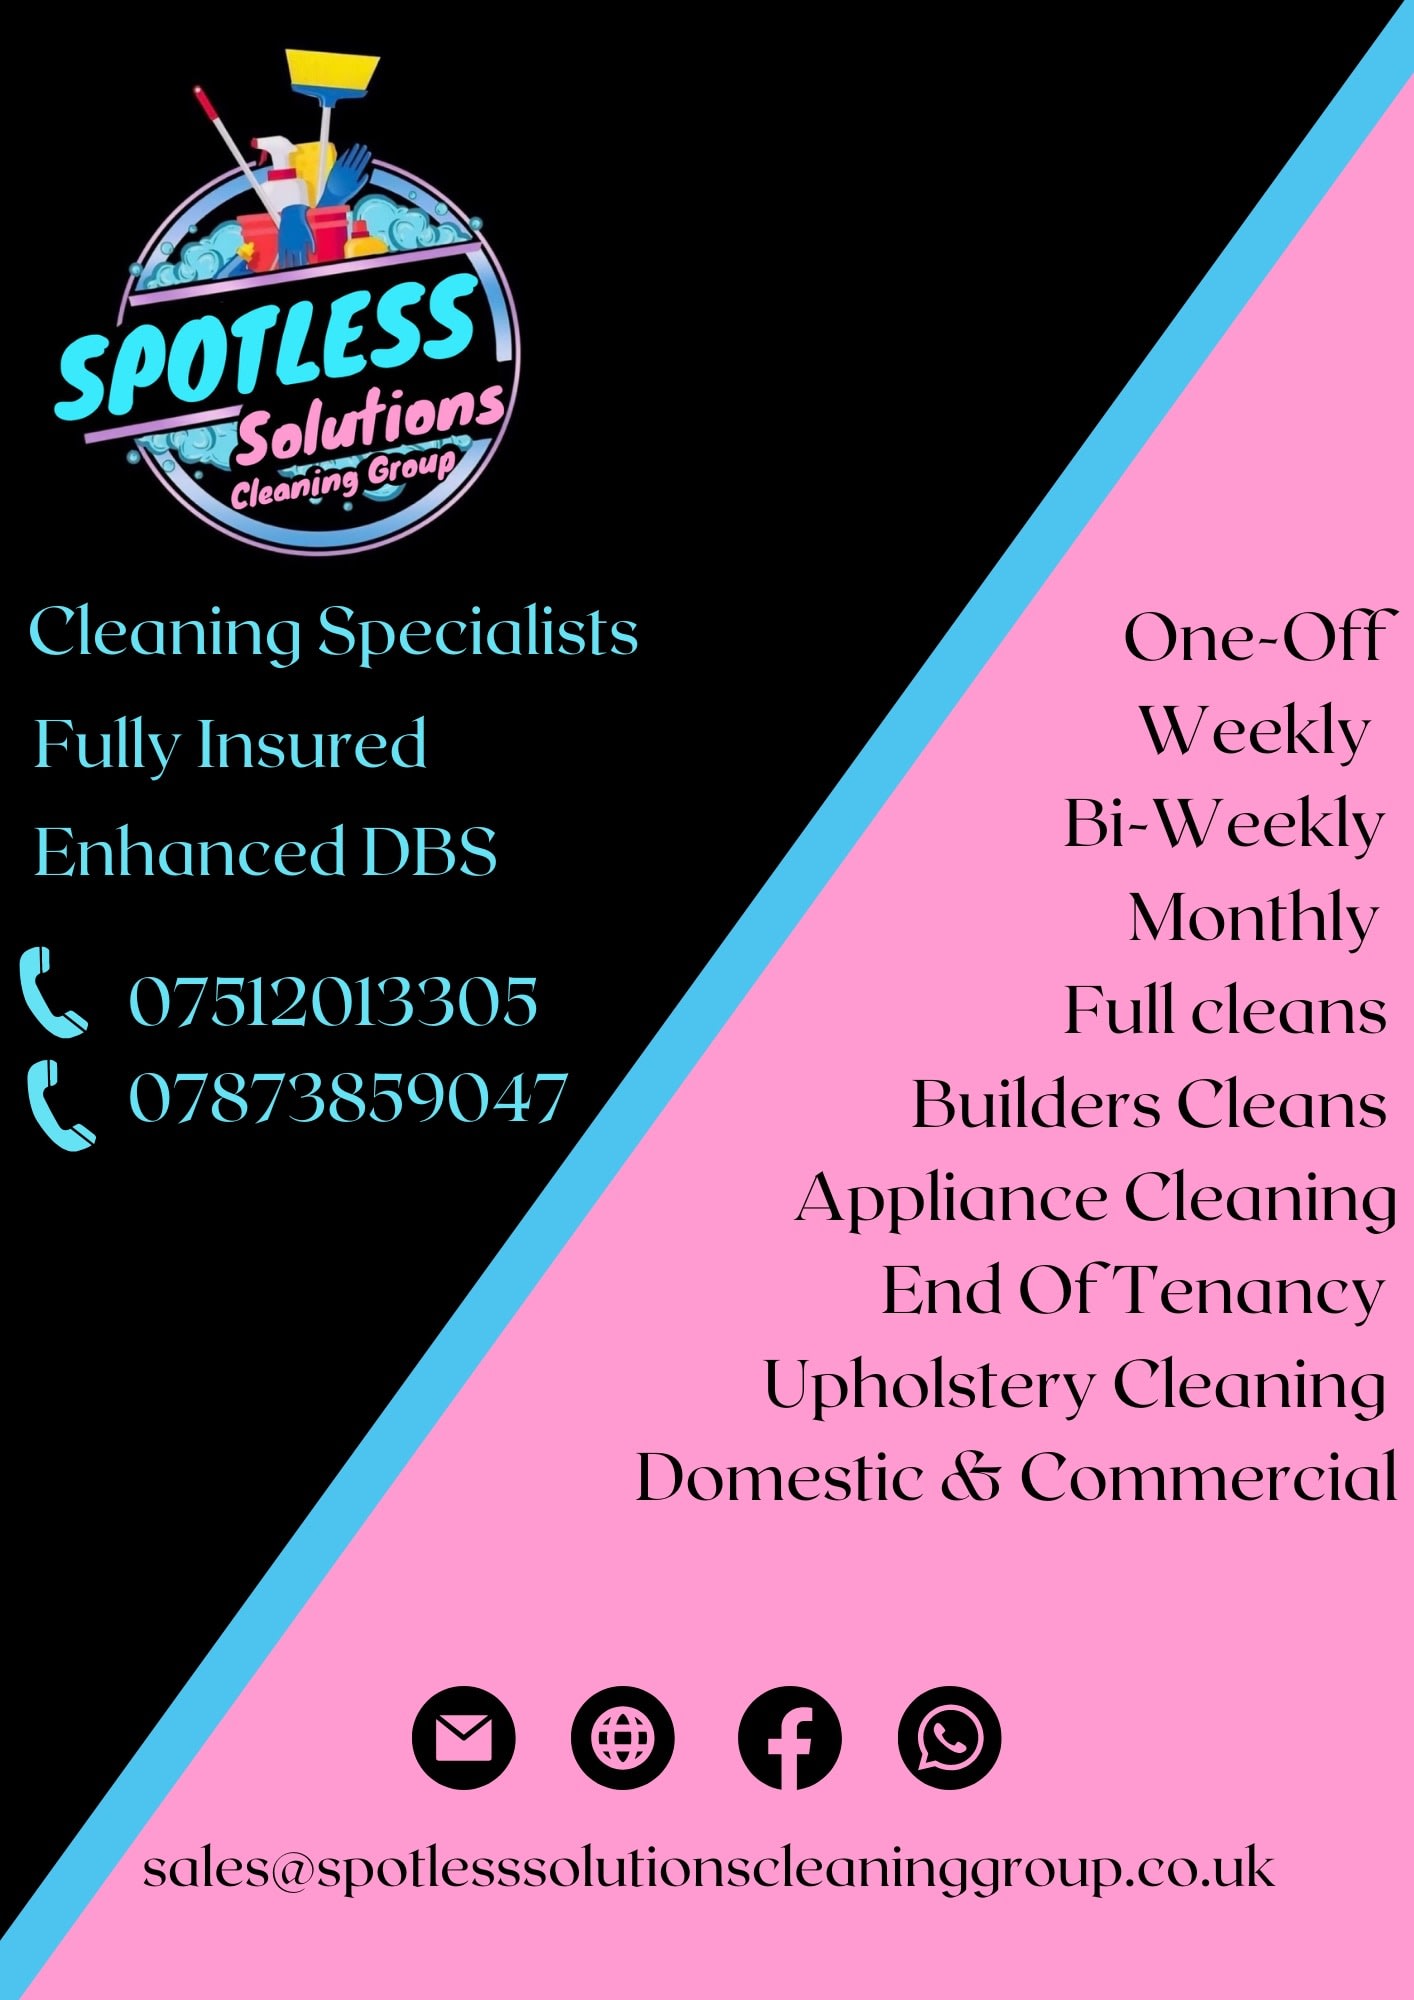 Images Spotless Solutions Cleaning Group